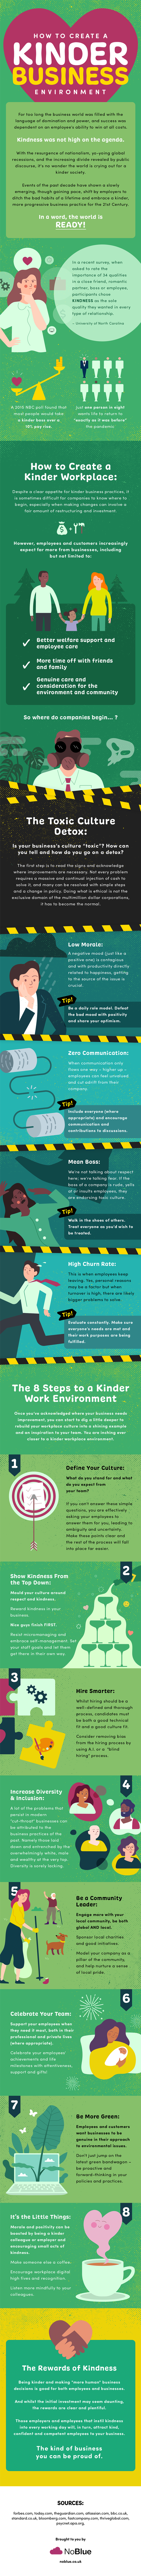 How to Create a Kinder Business Environment infographic